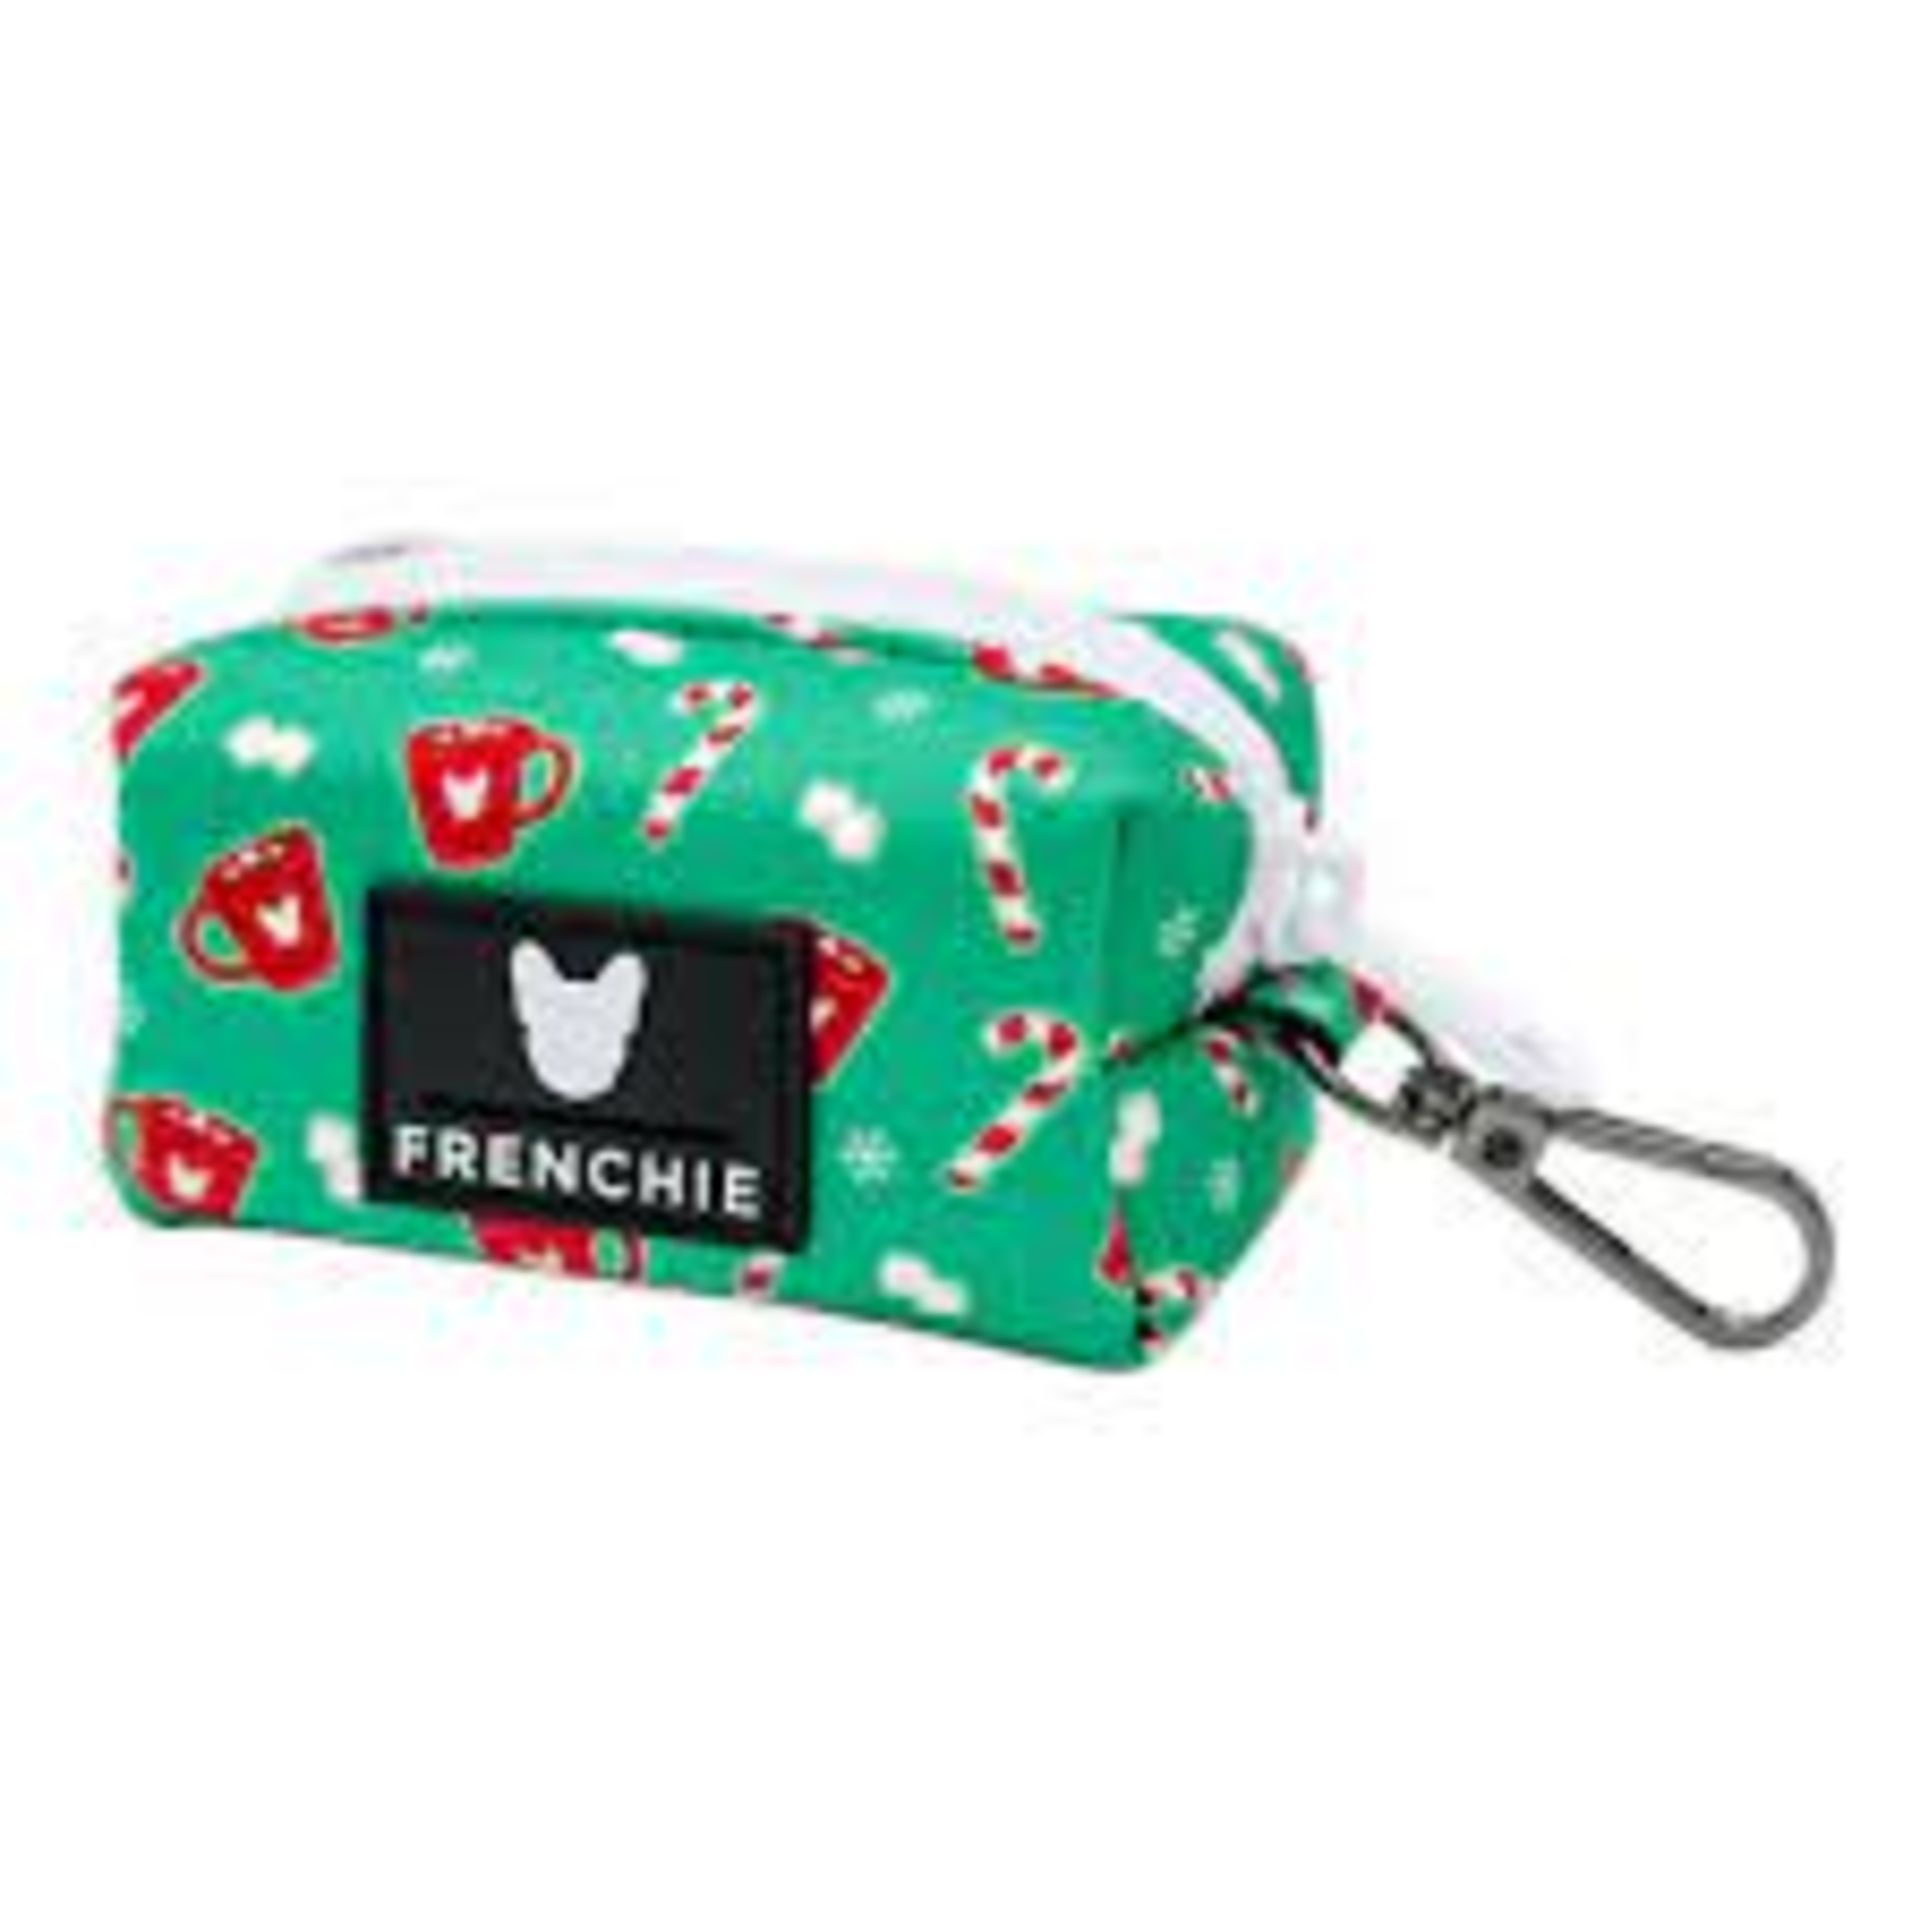 Bulk Trade Lot 500 X New .Packaged Frenchie The Bulldog Luxury Branded Dog Products. May include - Image 43 of 50